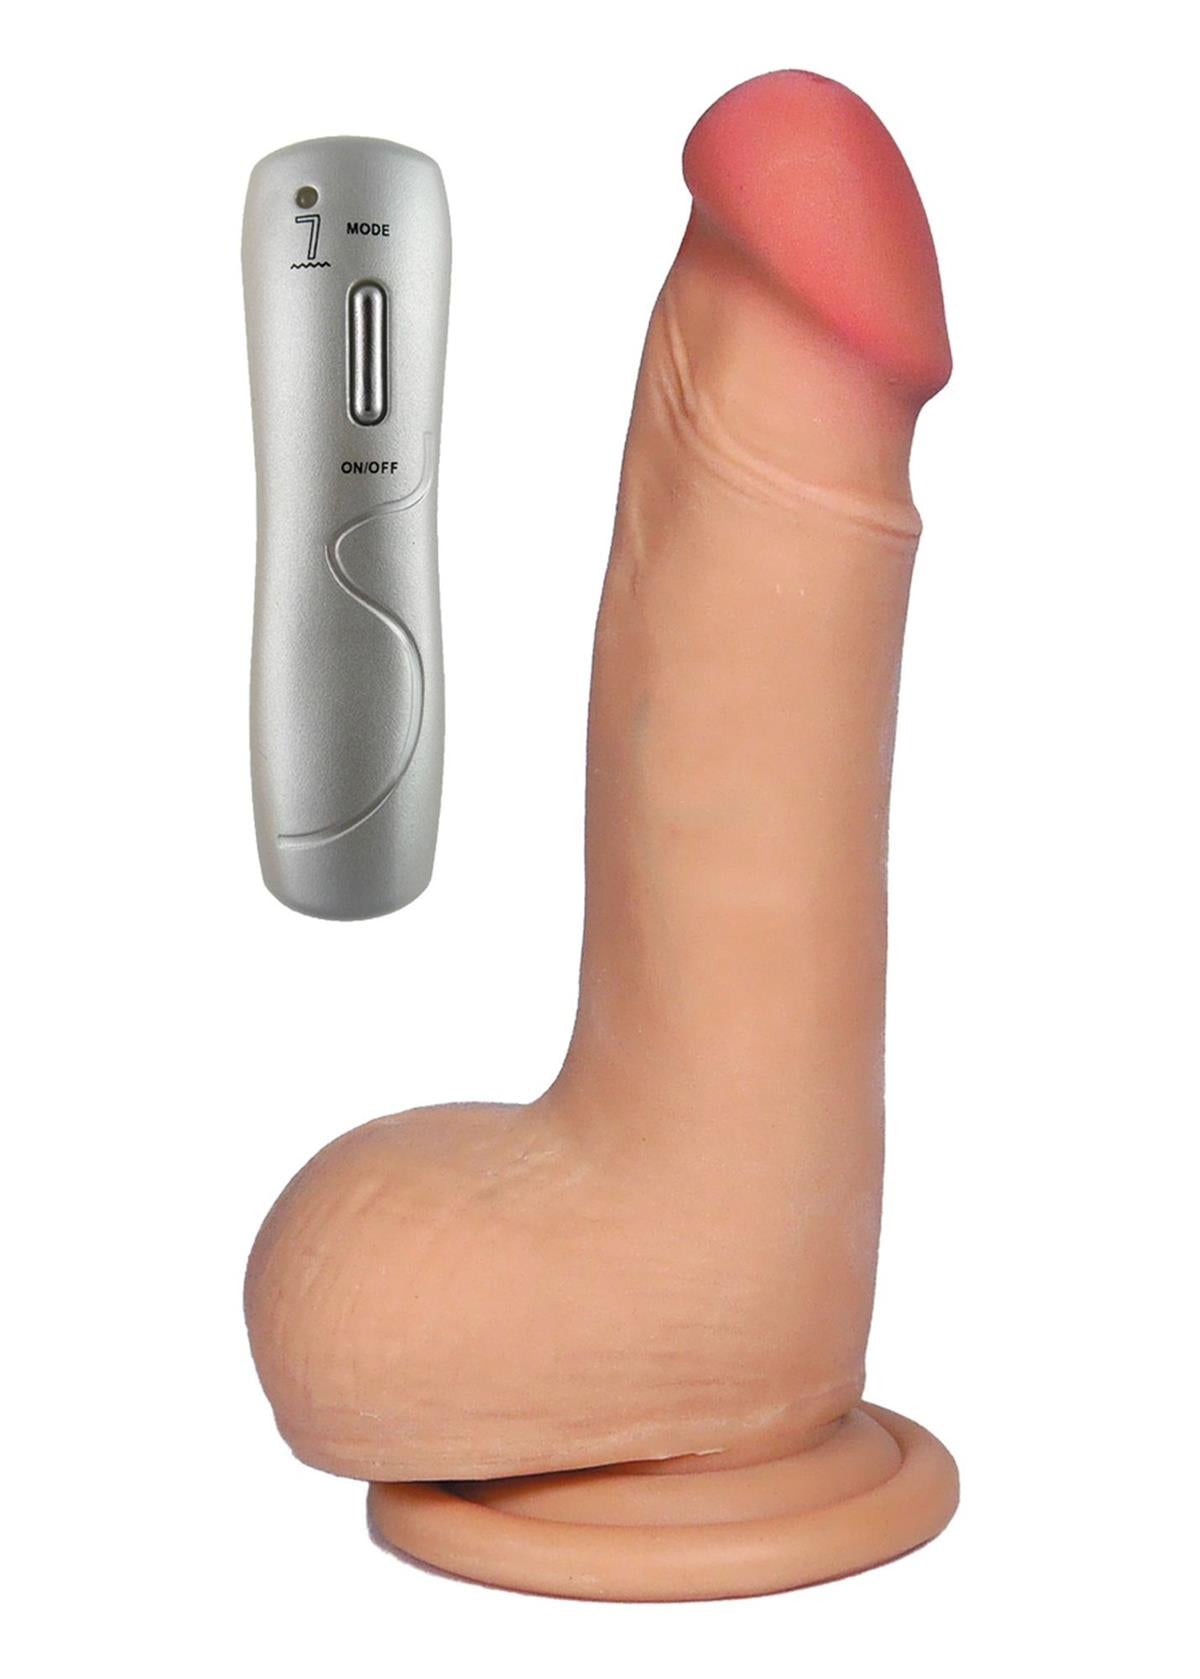 Bossoftoys Ares Loveclonex Ultra Realistic Vibrator - Cyber skin feels like real - Better then Silicone - 3 cm thick - 21-00001 - Suction Cup - Wired Remote - Flesh - 6 inch / 15 cm